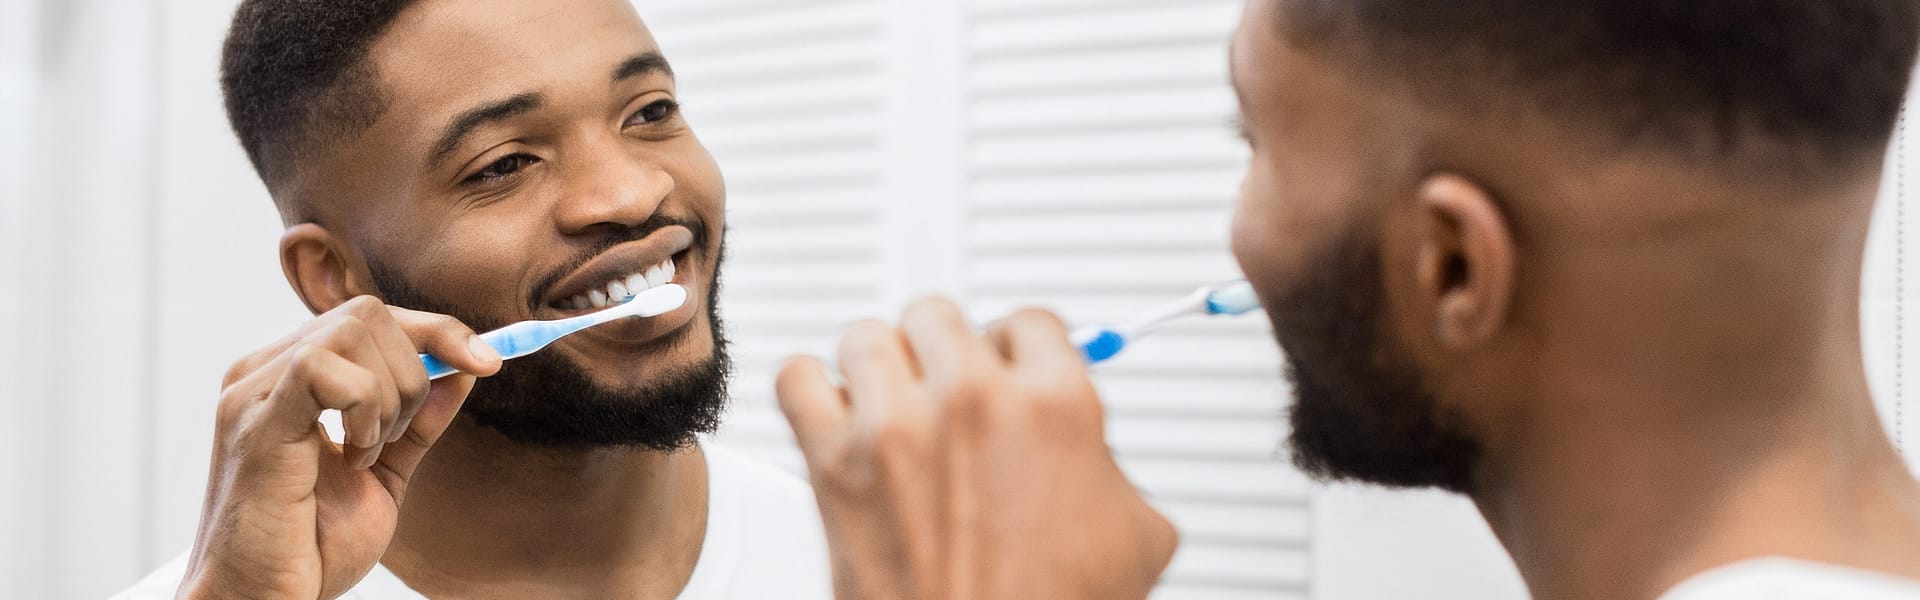 How Does Bad Oral Hygiene Affect Your Overall Health?